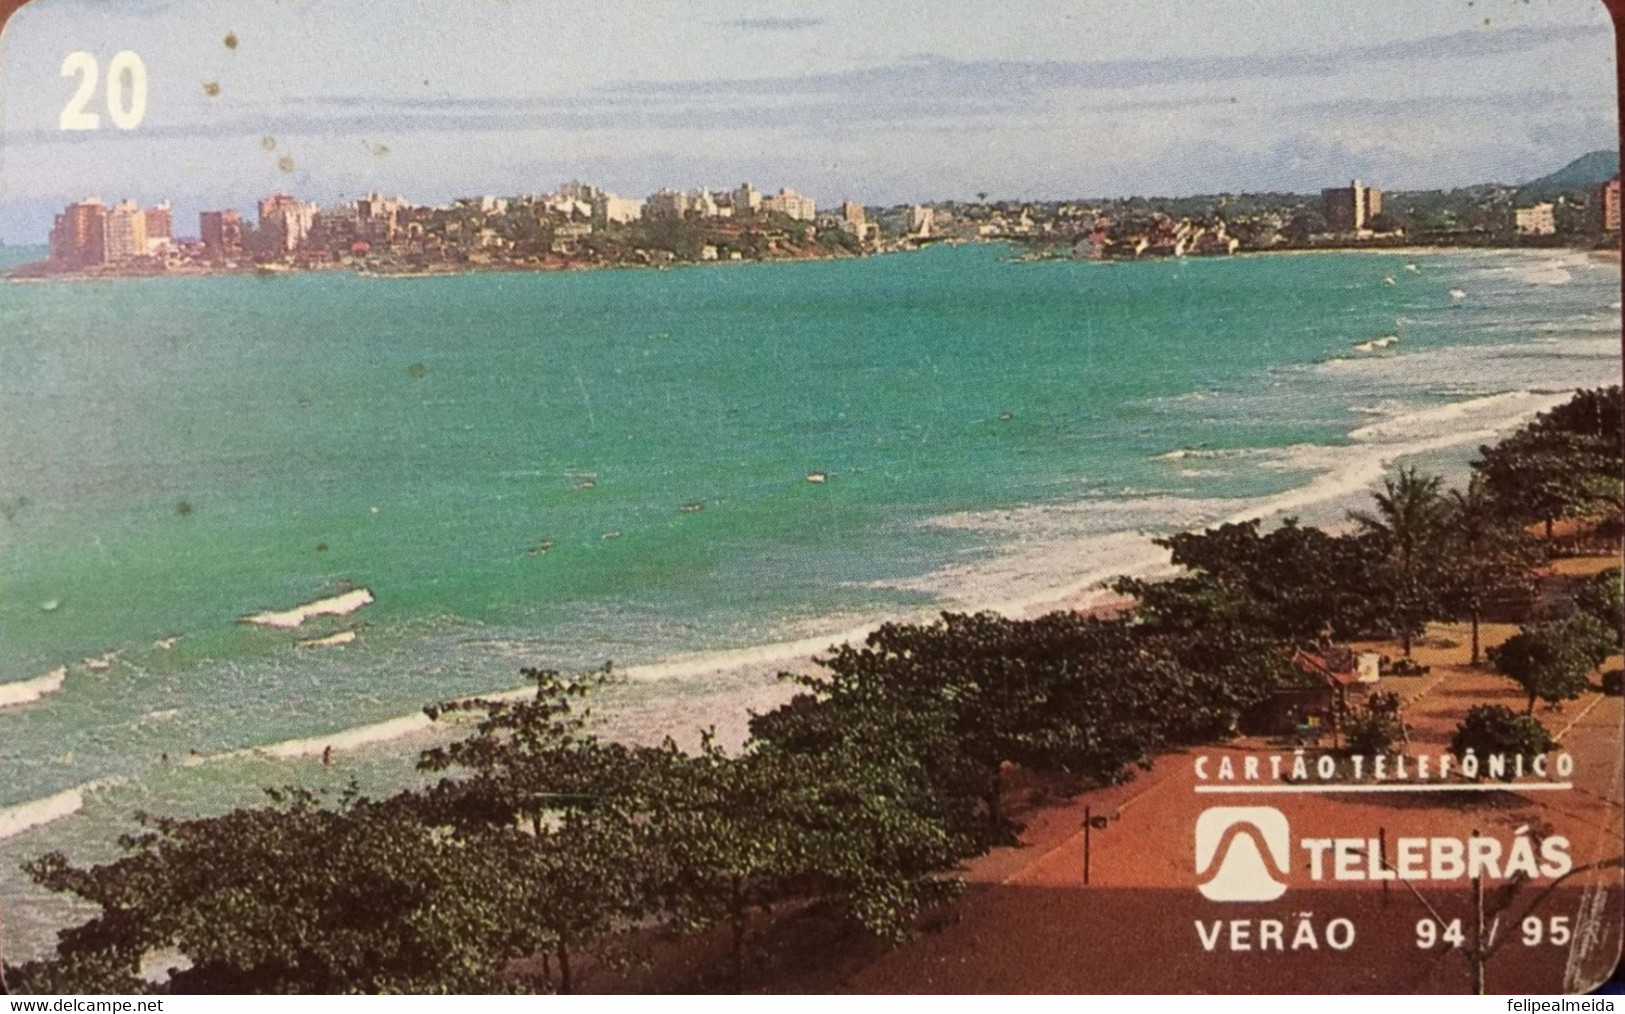 Rare 26 Years Old Phone Card Manufactured By Telebras In 1995 - Series Summer 1994 - 1995 Photo Praia Do Morro - Guarapa - Culture